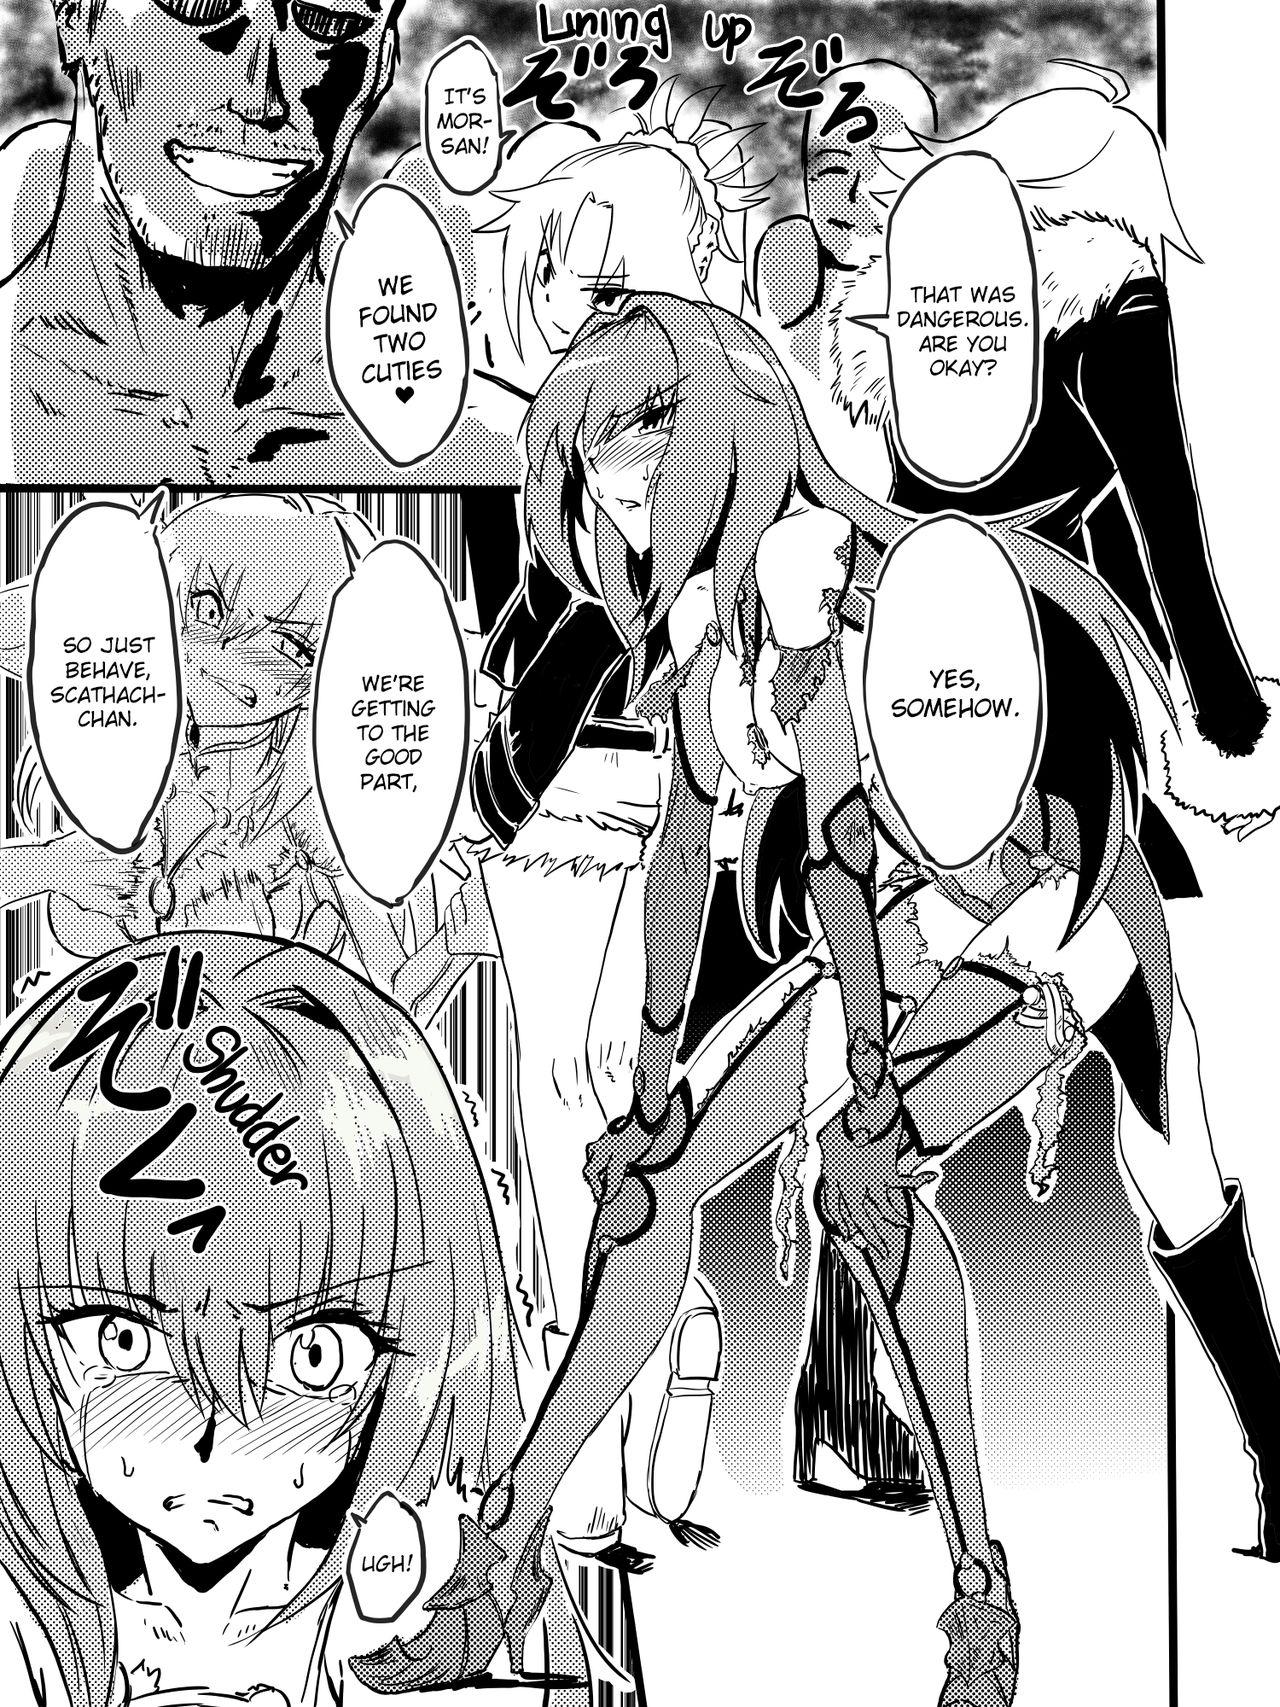 Interracial Porn Tousouchuu in Chaldea | Running away in Chaldea - Fate grand order Nipples - Page 5